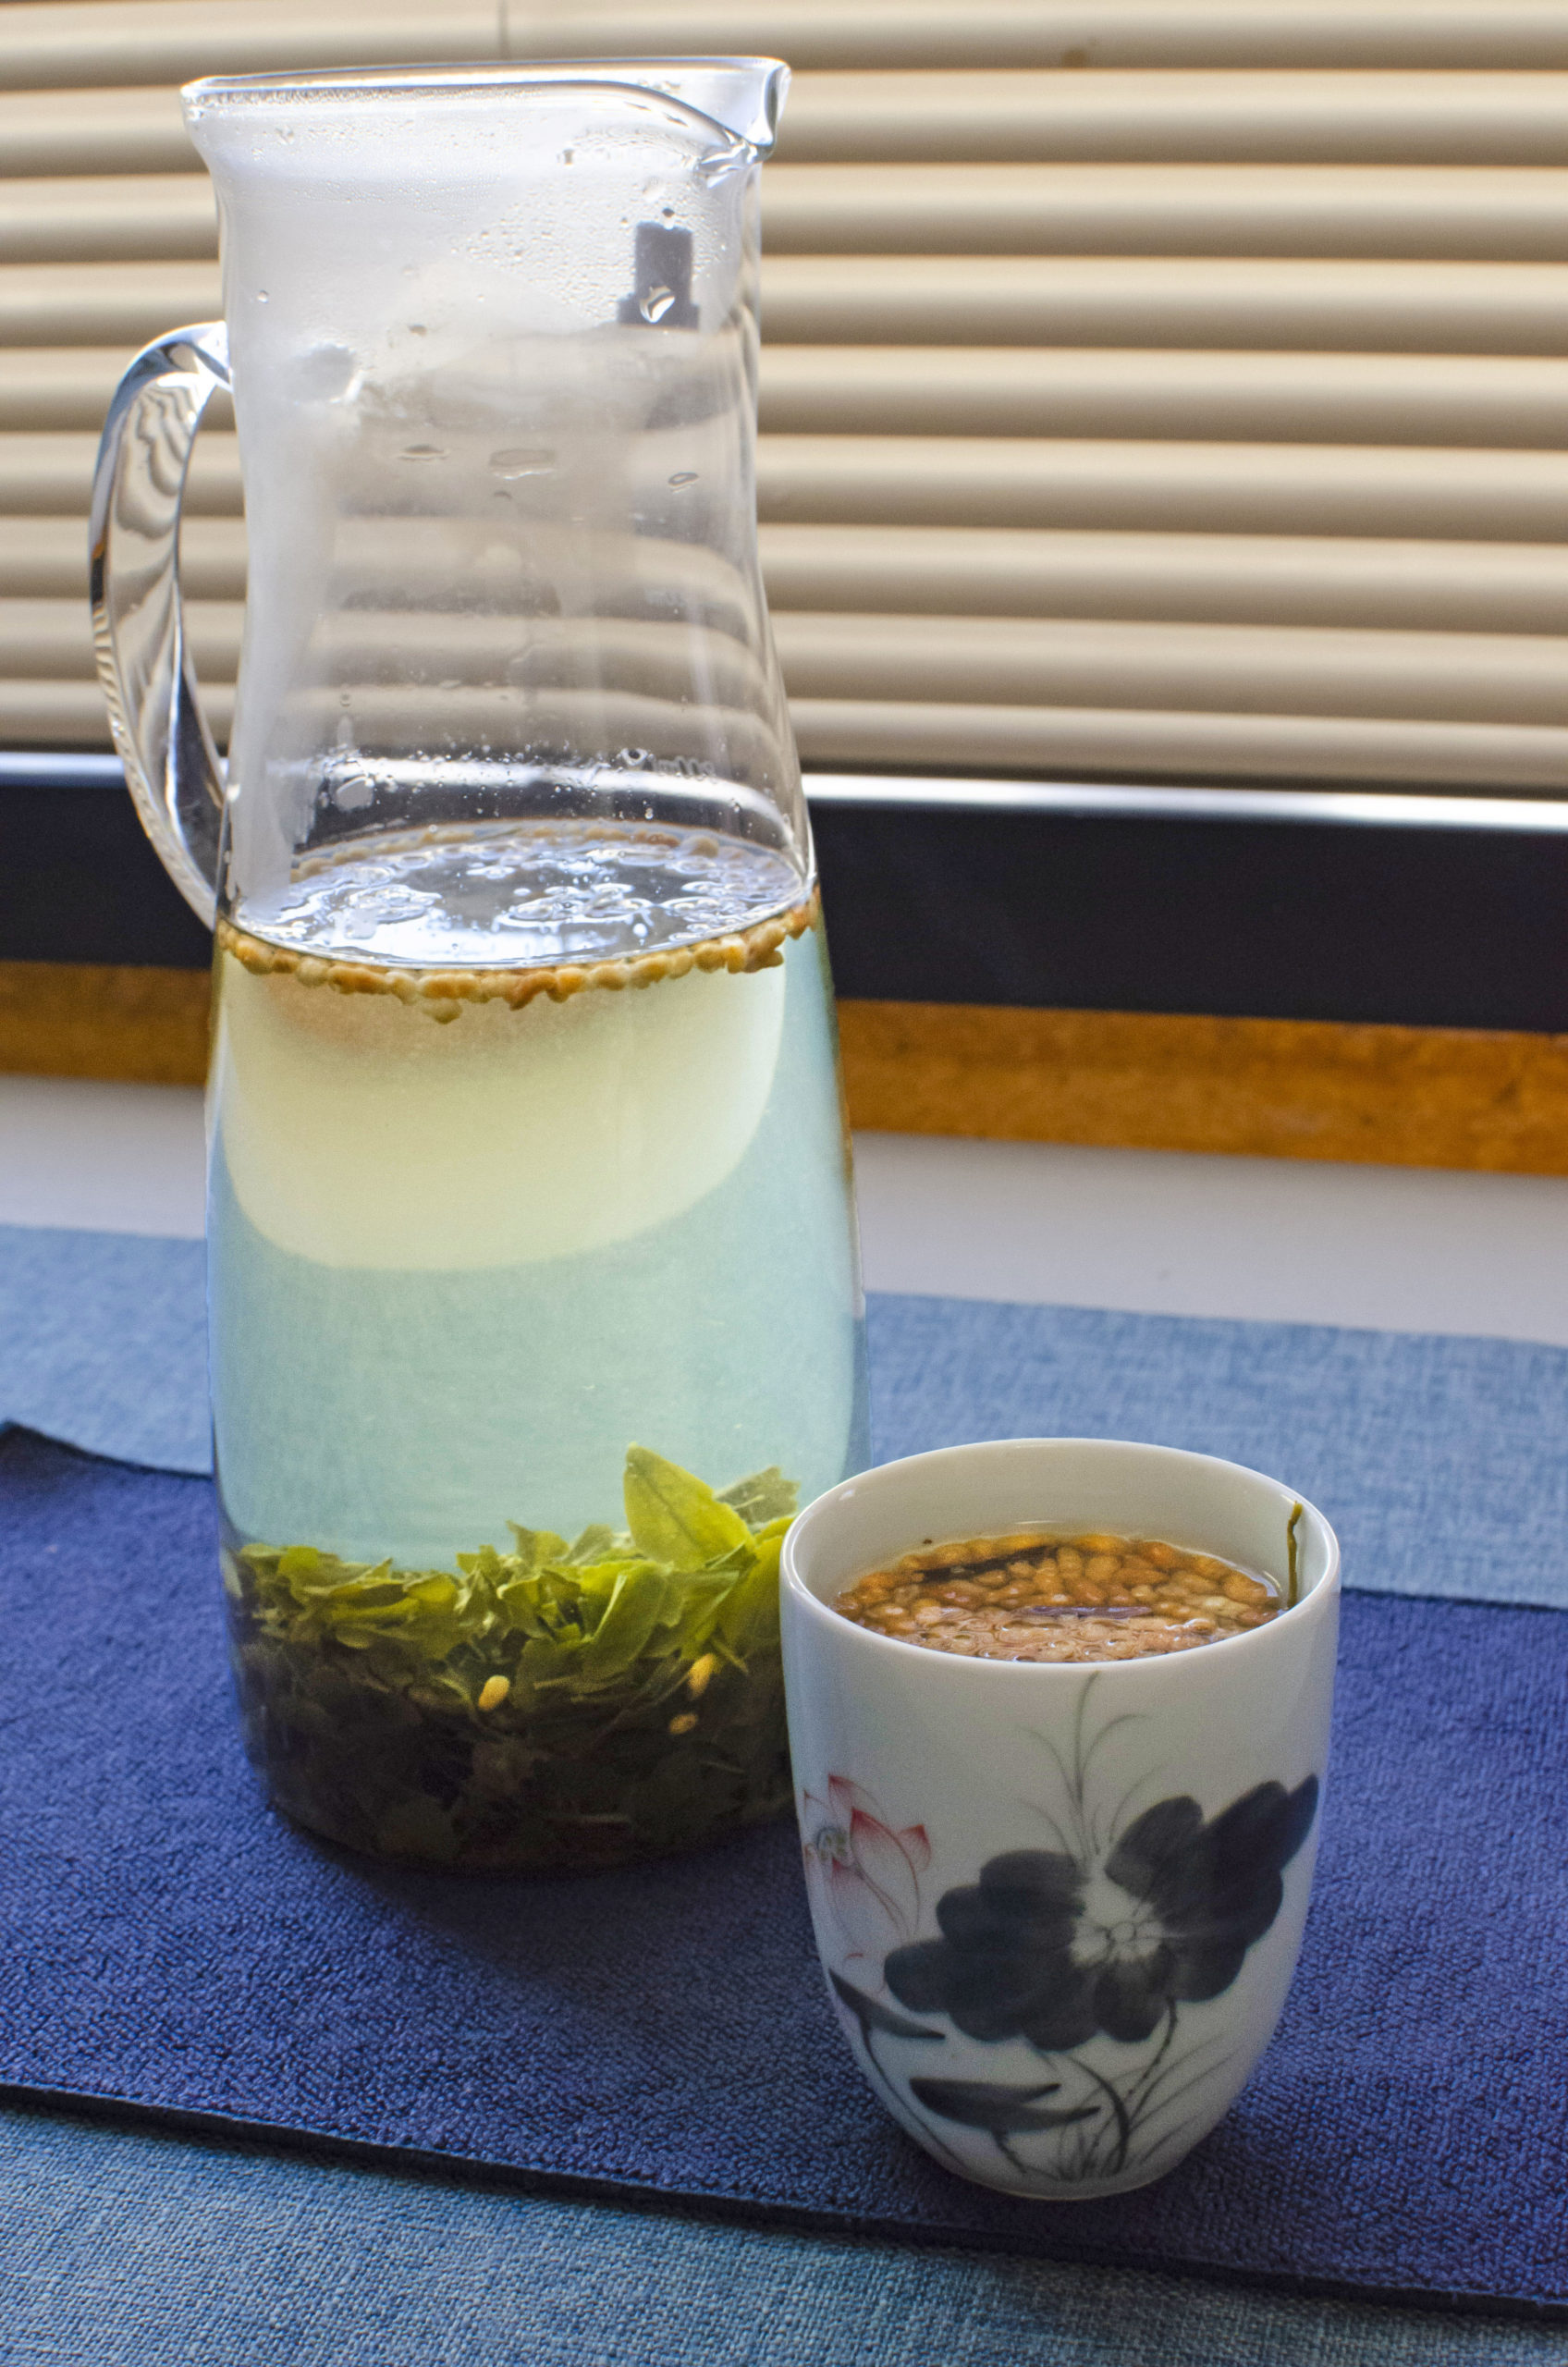 A glass pitcher full of green tea leaves and toasted rice sits on a blue surface infront of a window.